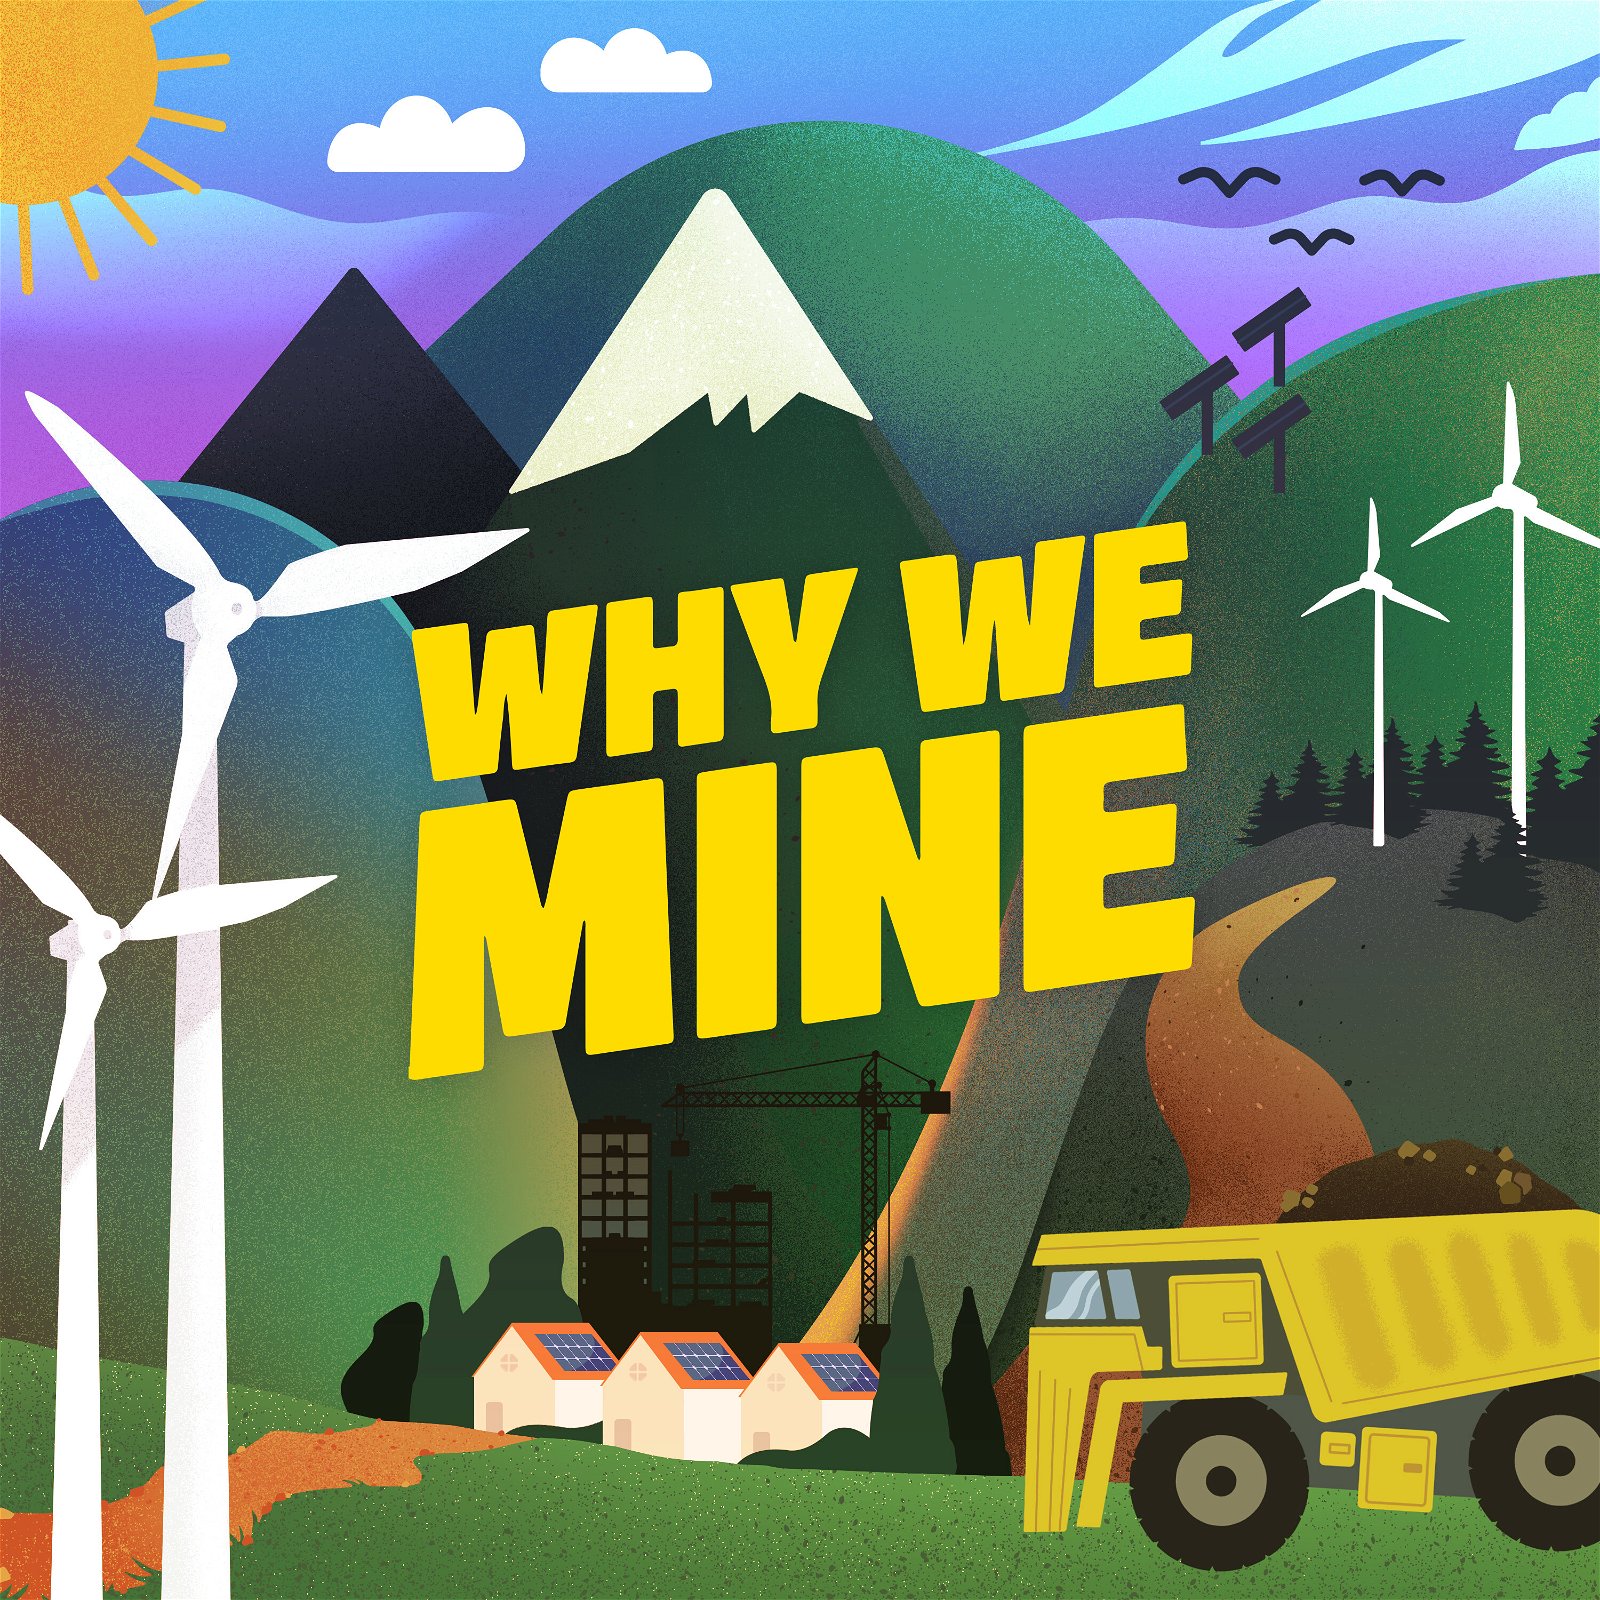 Mining For Our Green Future: Inside the Race to Sustainability